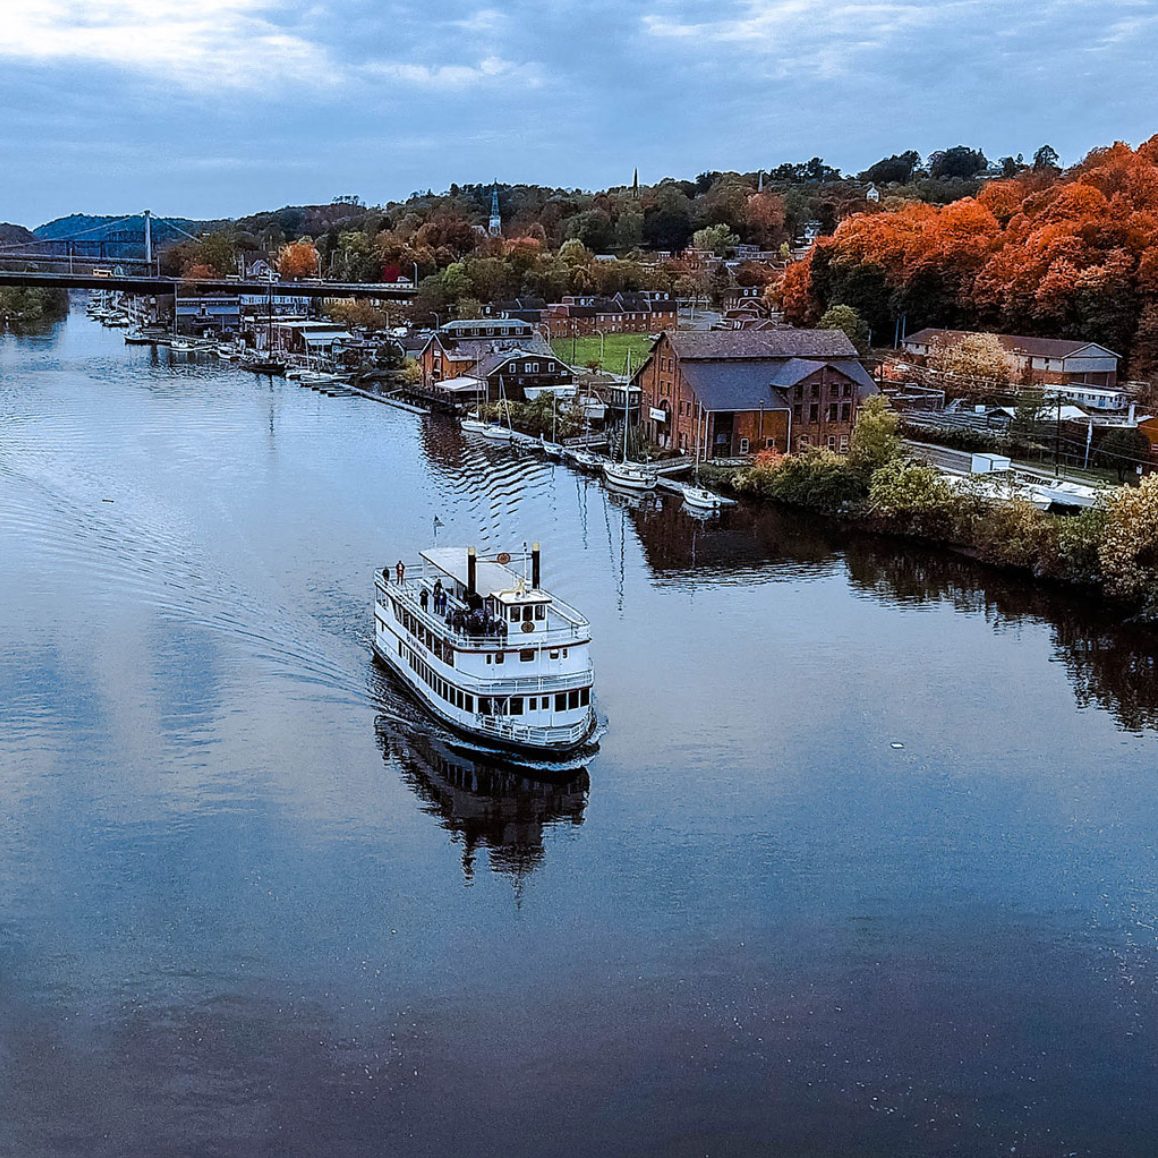 Aerial view of a Hudson River Cruise boat